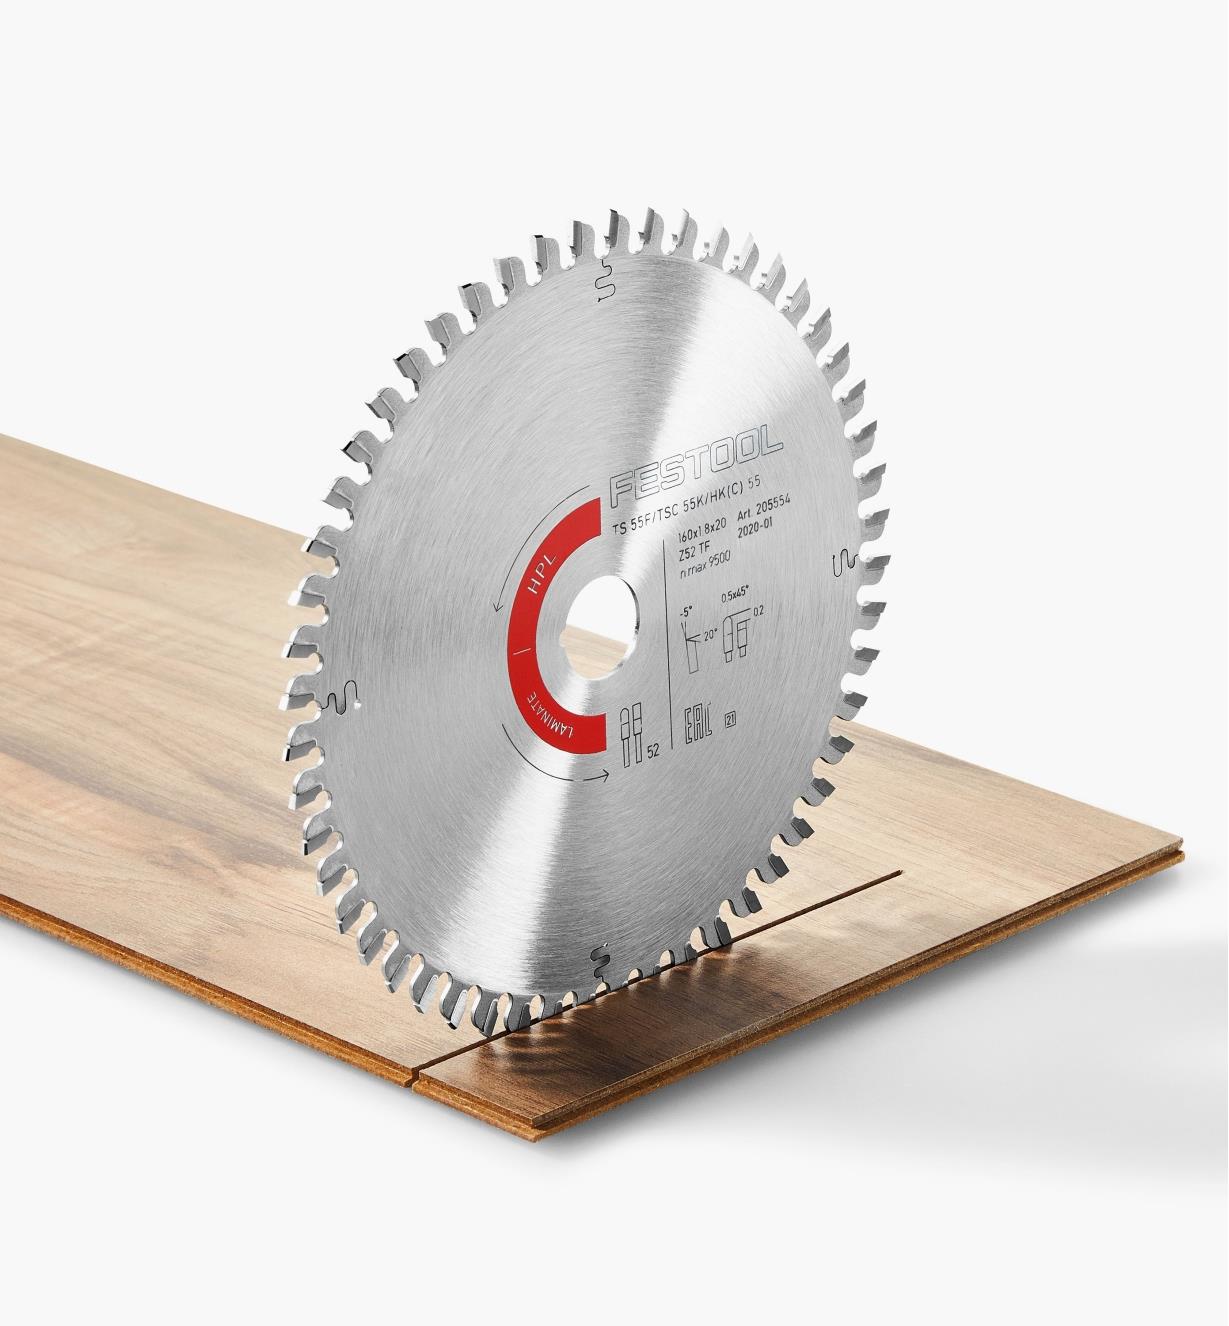 A laminate/HPL blade standing upright on a piece of laminate flooring